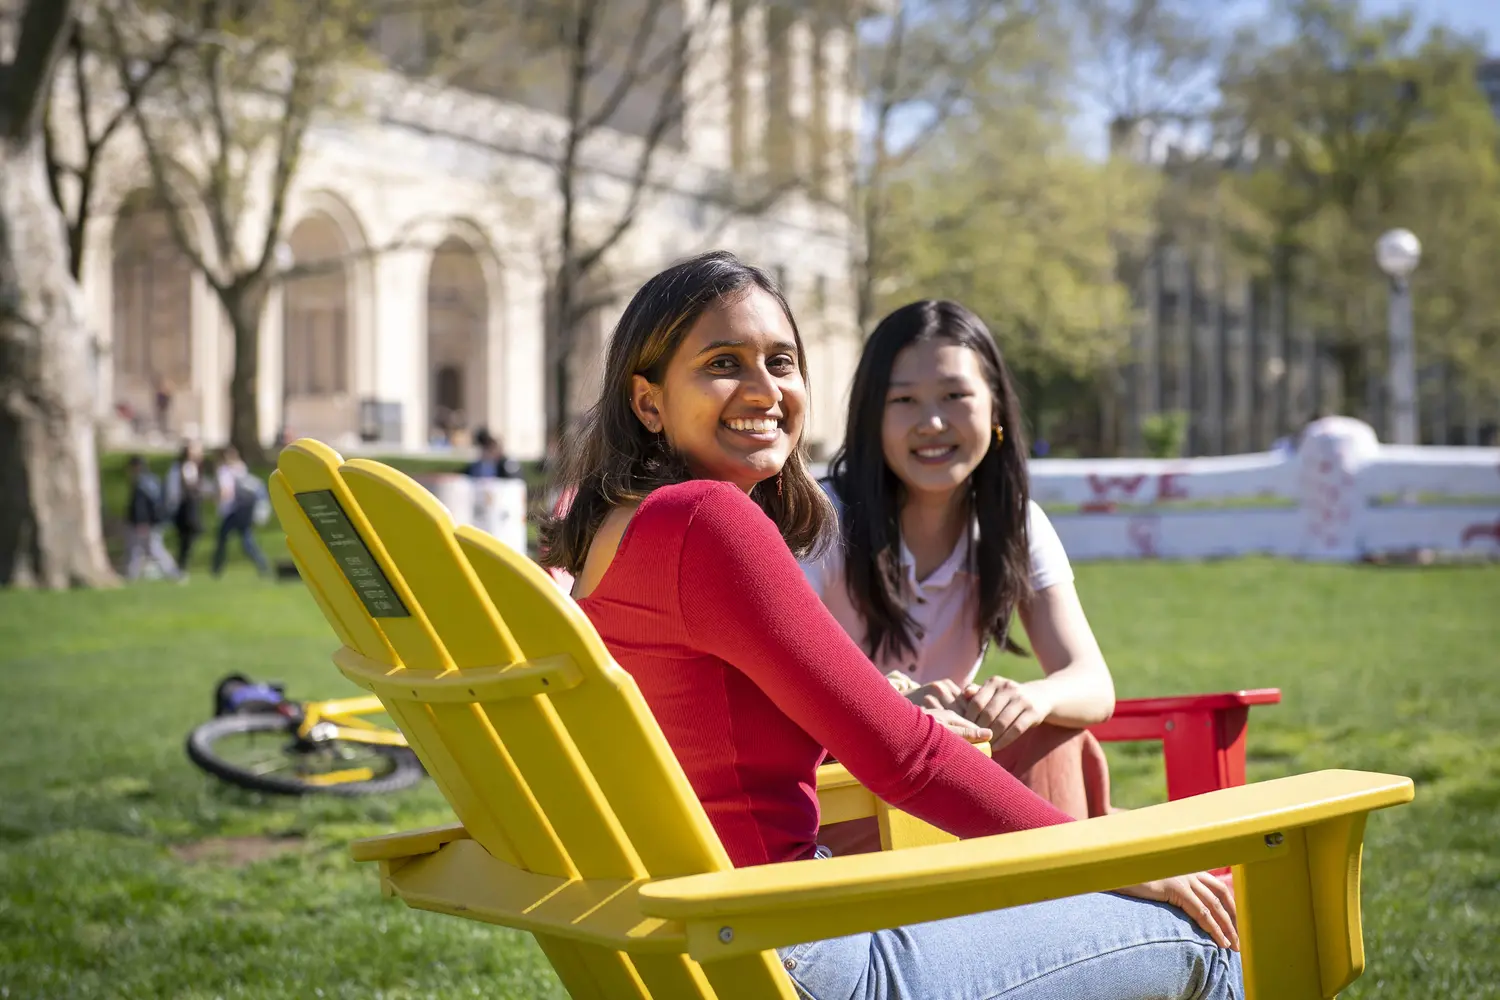 Students in the brightly-colored Adirondack chairs on the Lawn.